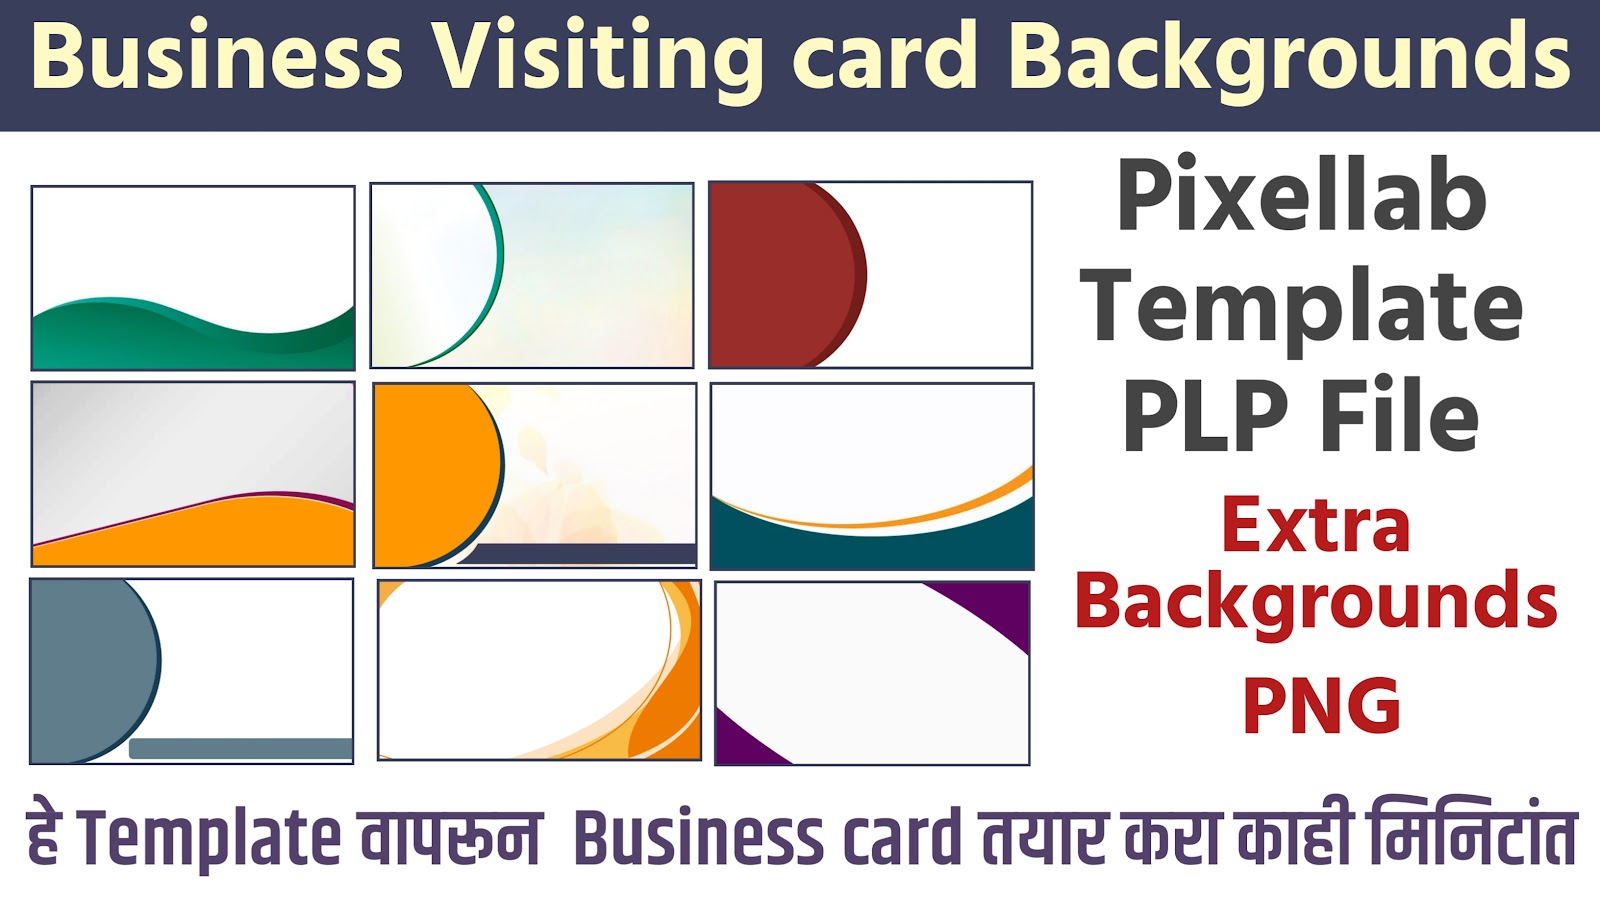 Mobile shop Business card making in mobile using pixellab PLP file